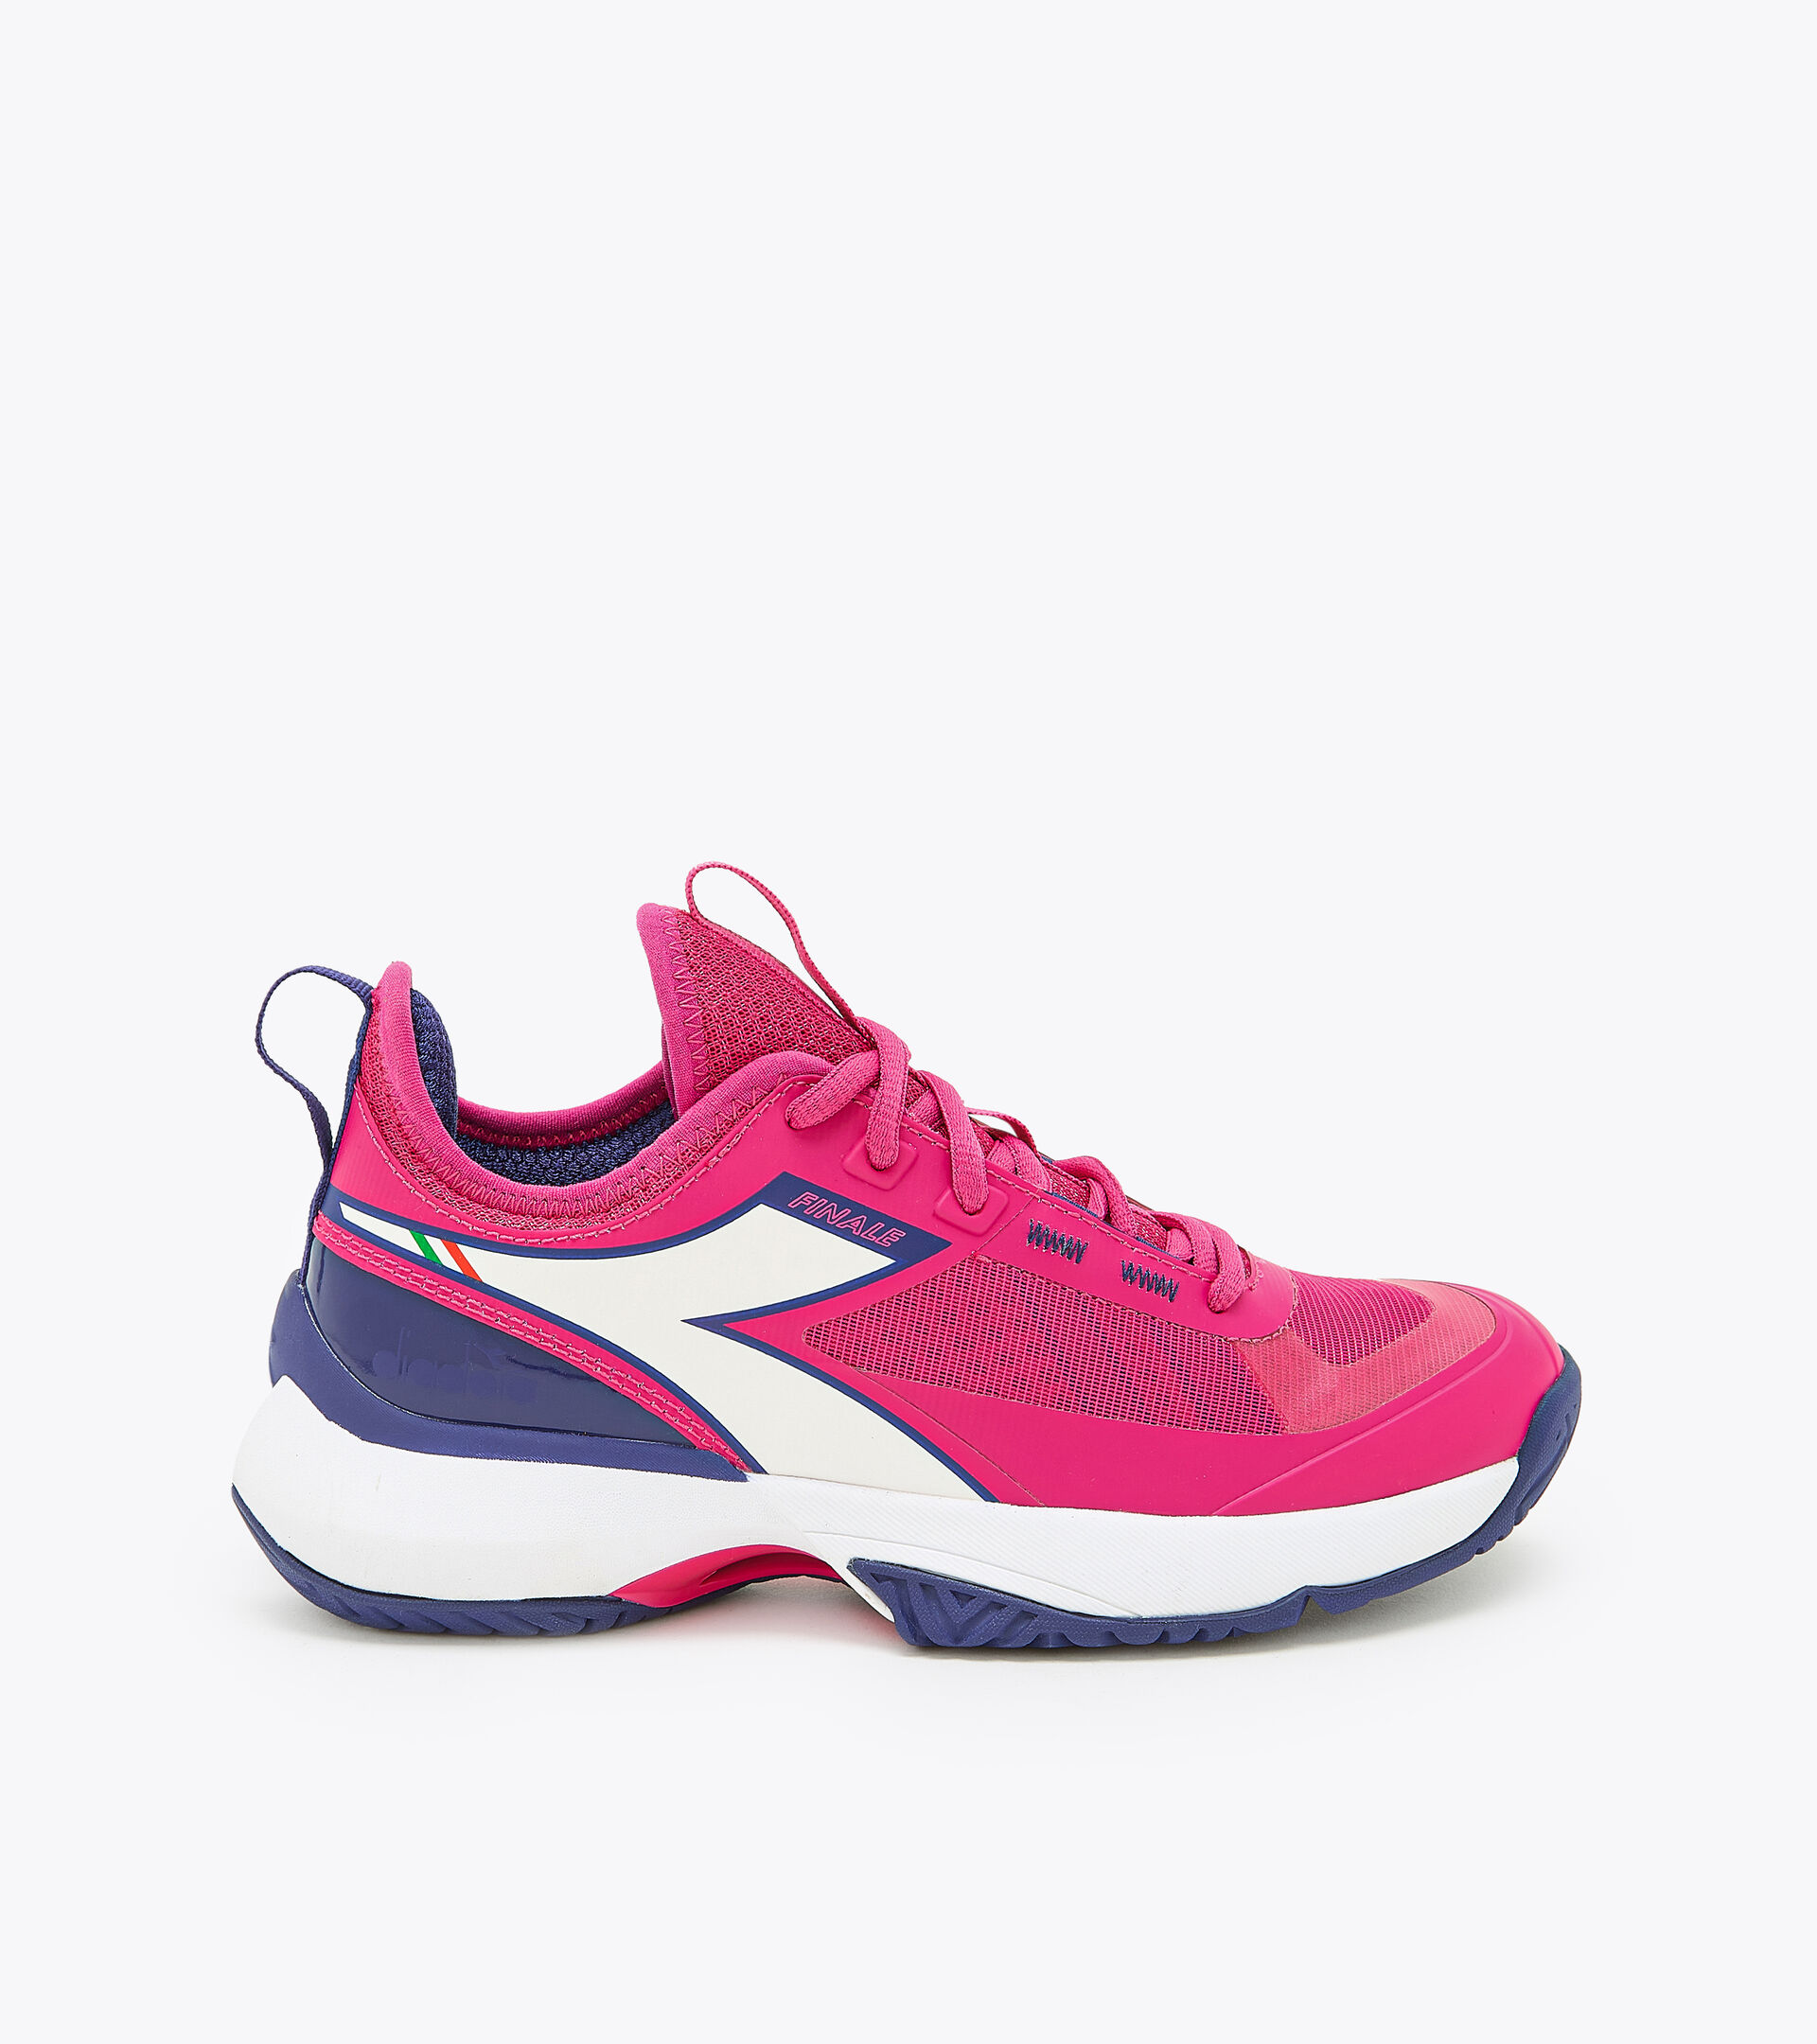 FINALE W AG Tennis shoes for hard surfaces or clay courts - Women - Diadora  Online Store US